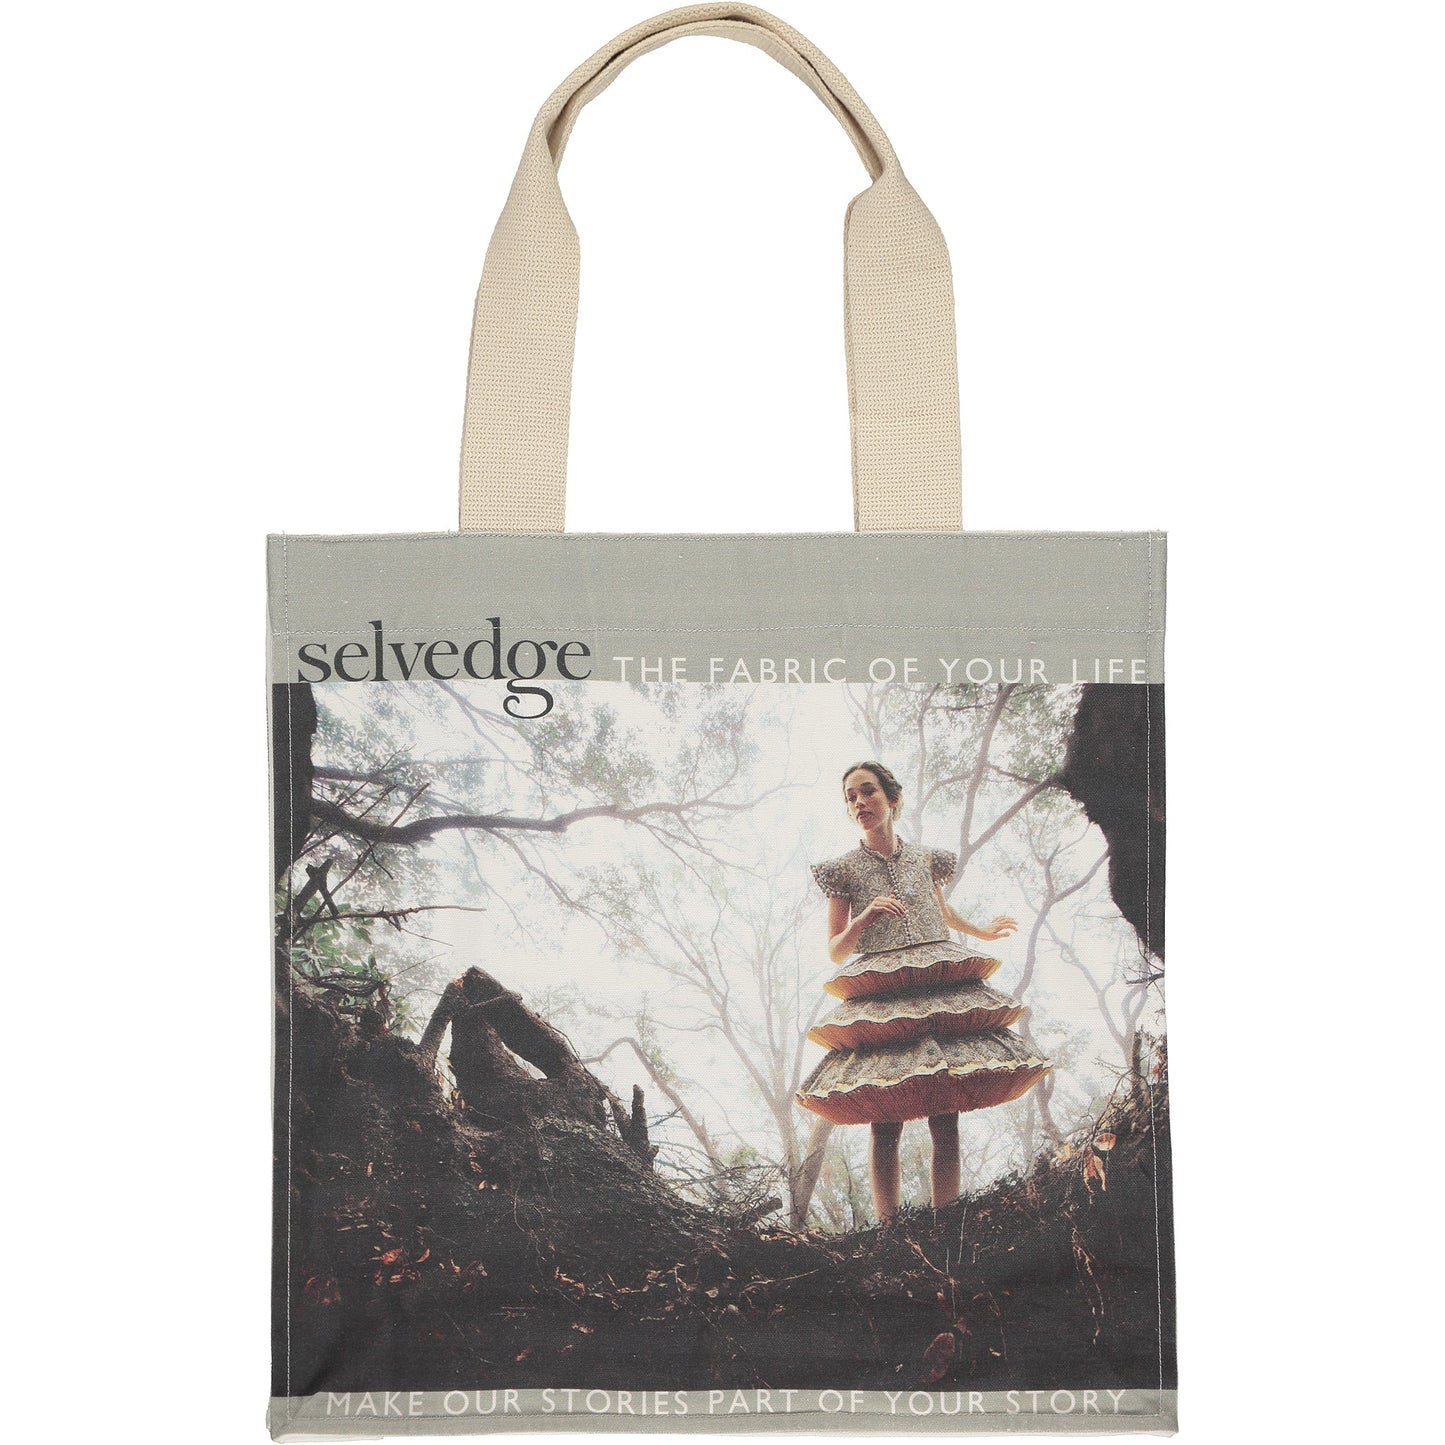 Free gift for new subscribers: The Selvedge Tote